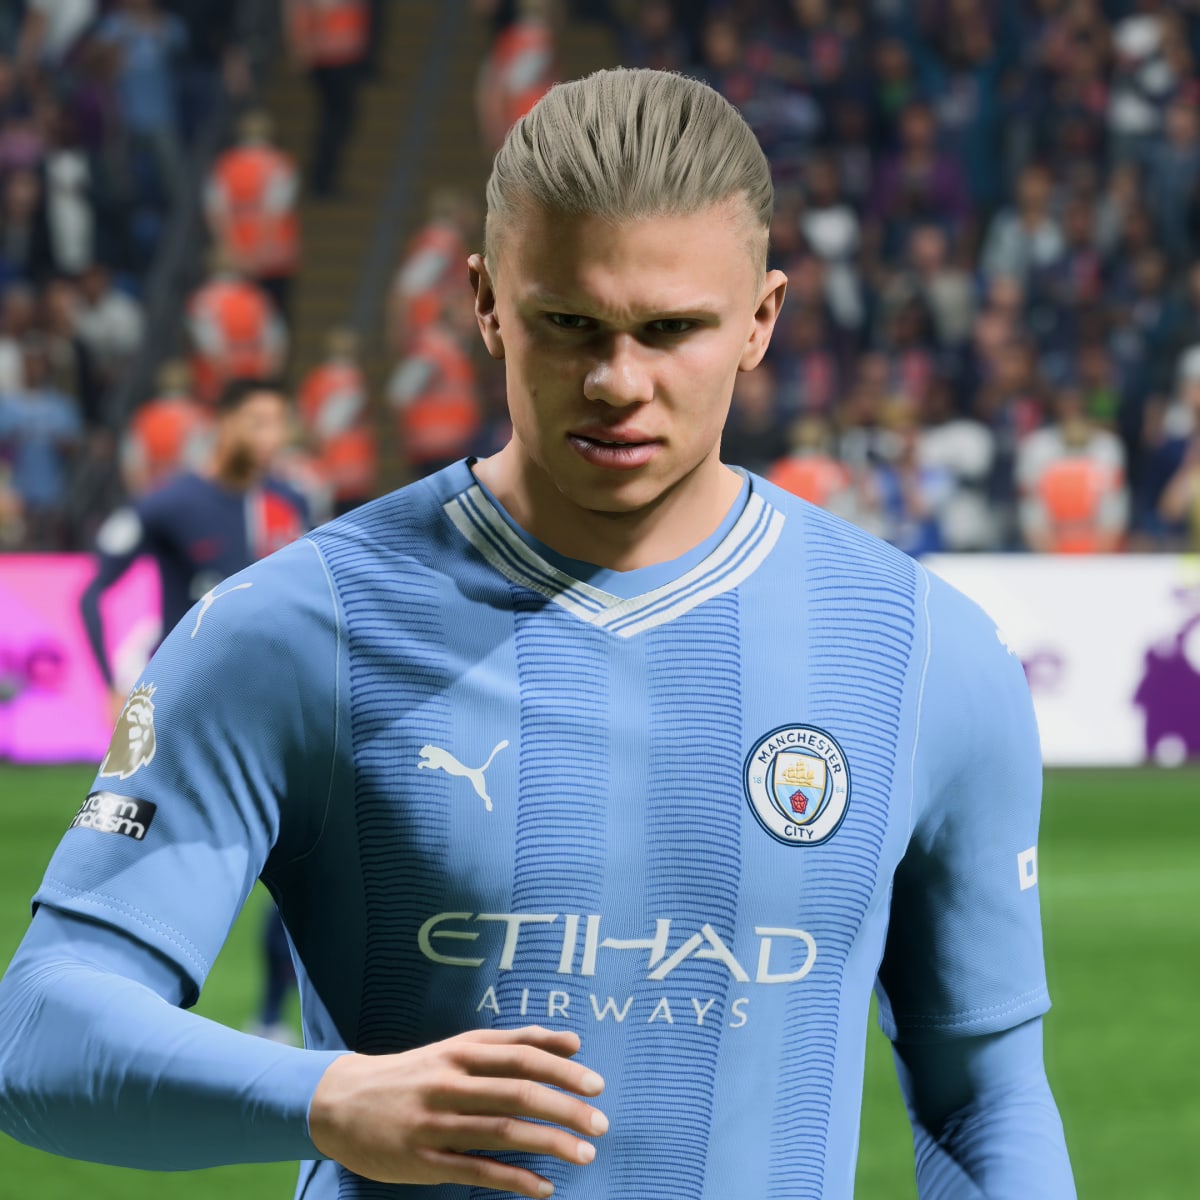 EA Spors FC Announces Its Top 25 Ranked Players